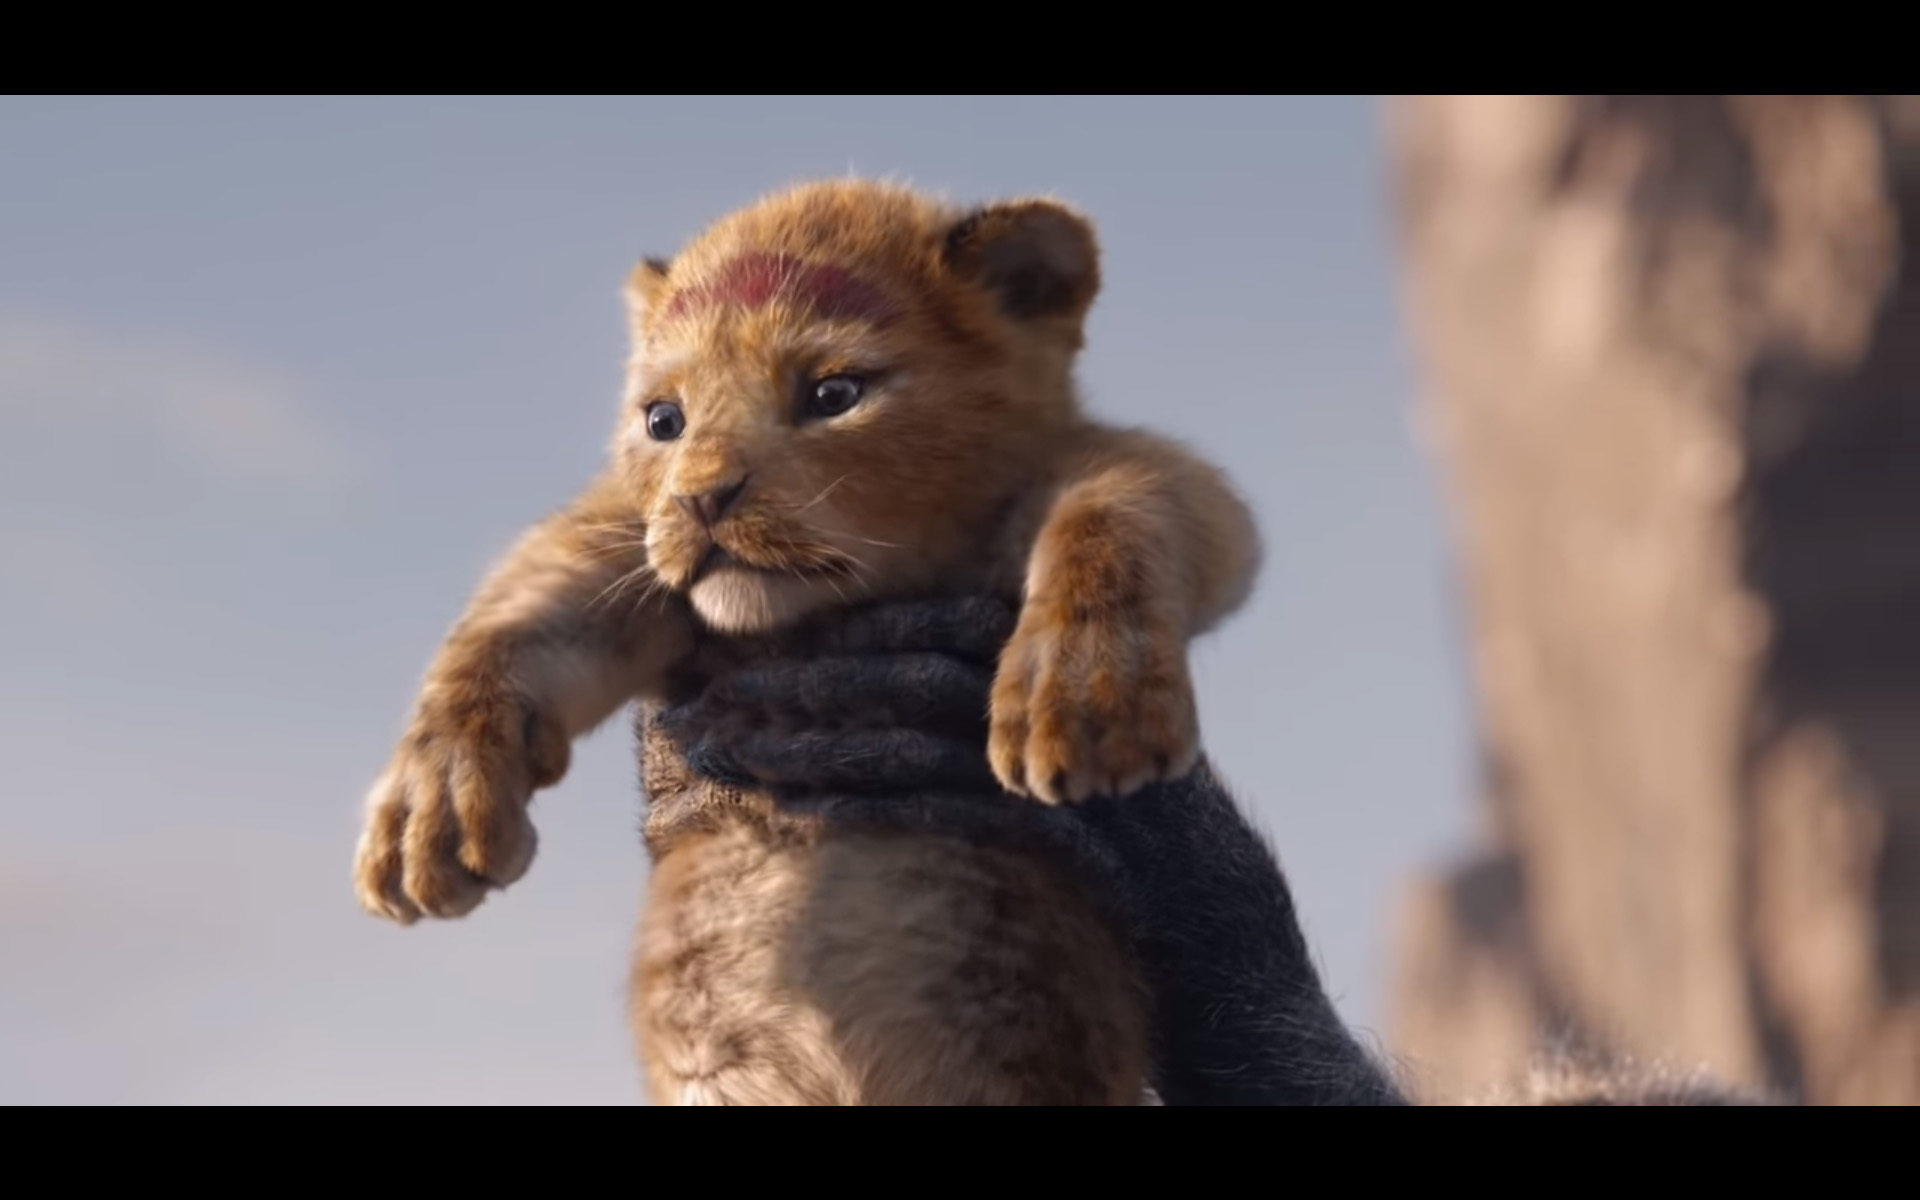 PHOTO: Simba appears in a teaser trailer for the 2019 remake of, "The Lion King."